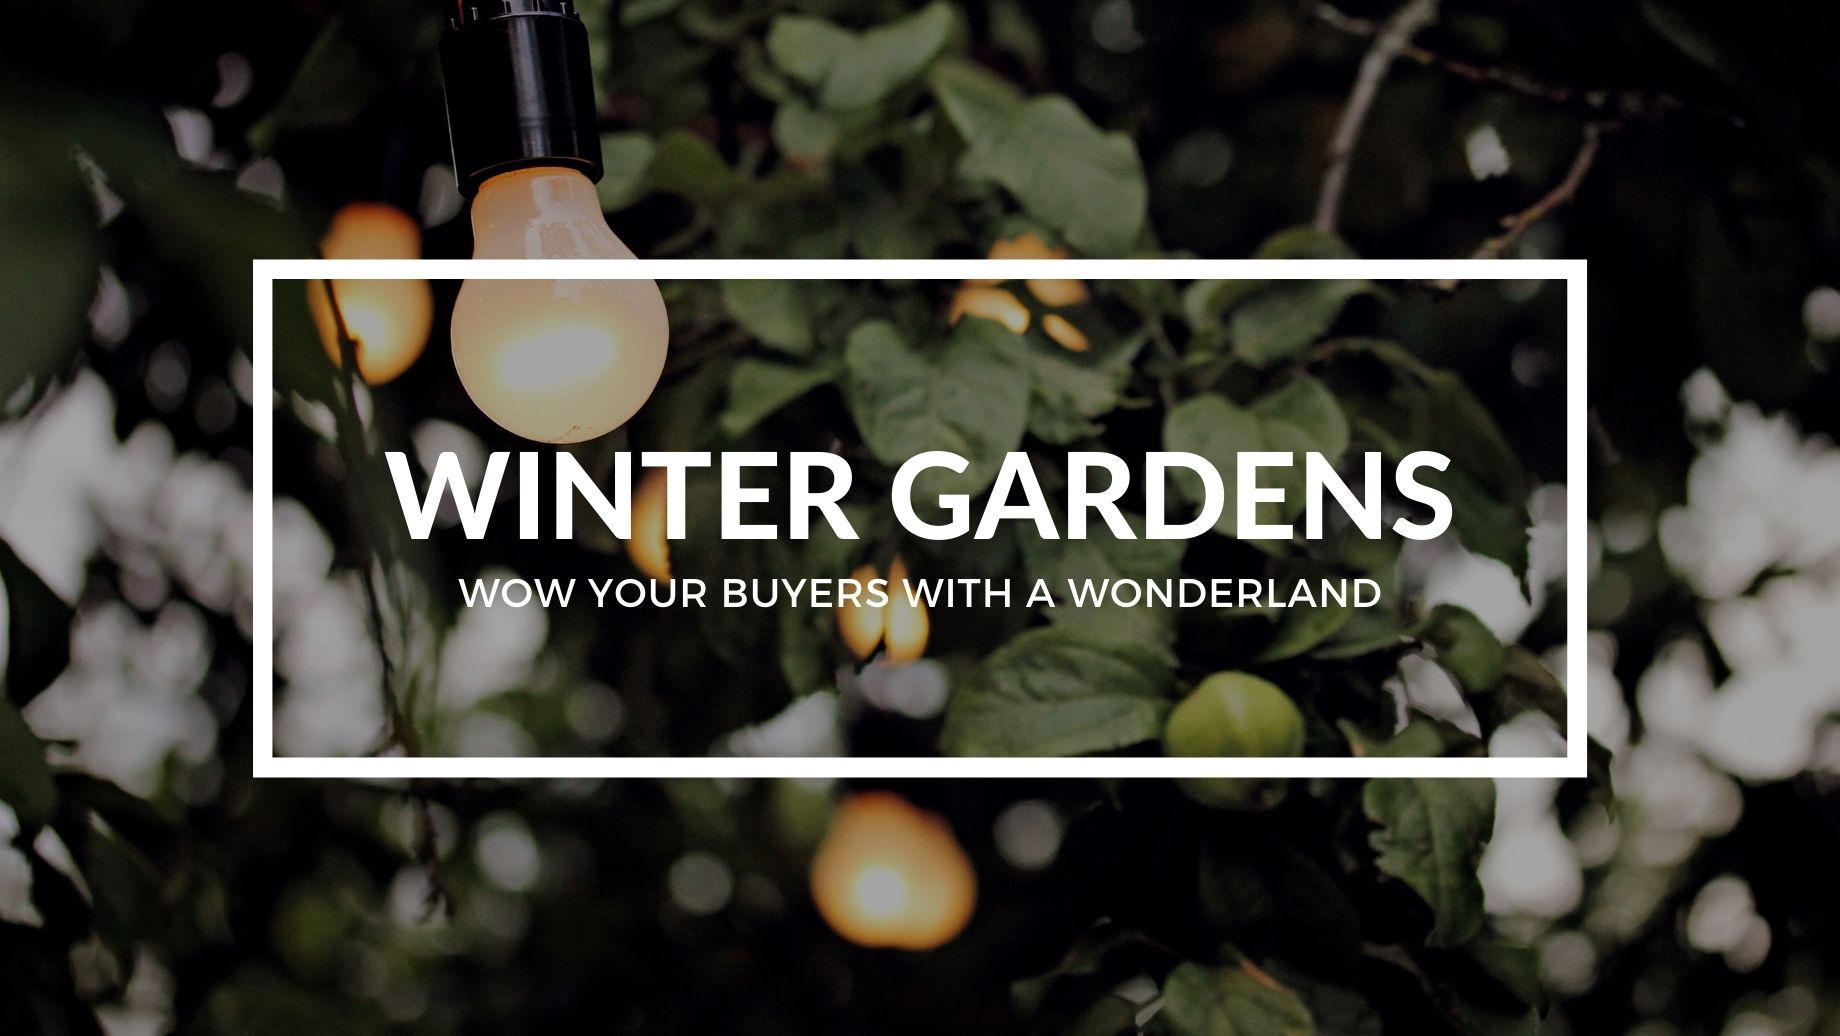 WINTER GARDENS: WOW YOUR BUYERS WITH A WONDERLAND